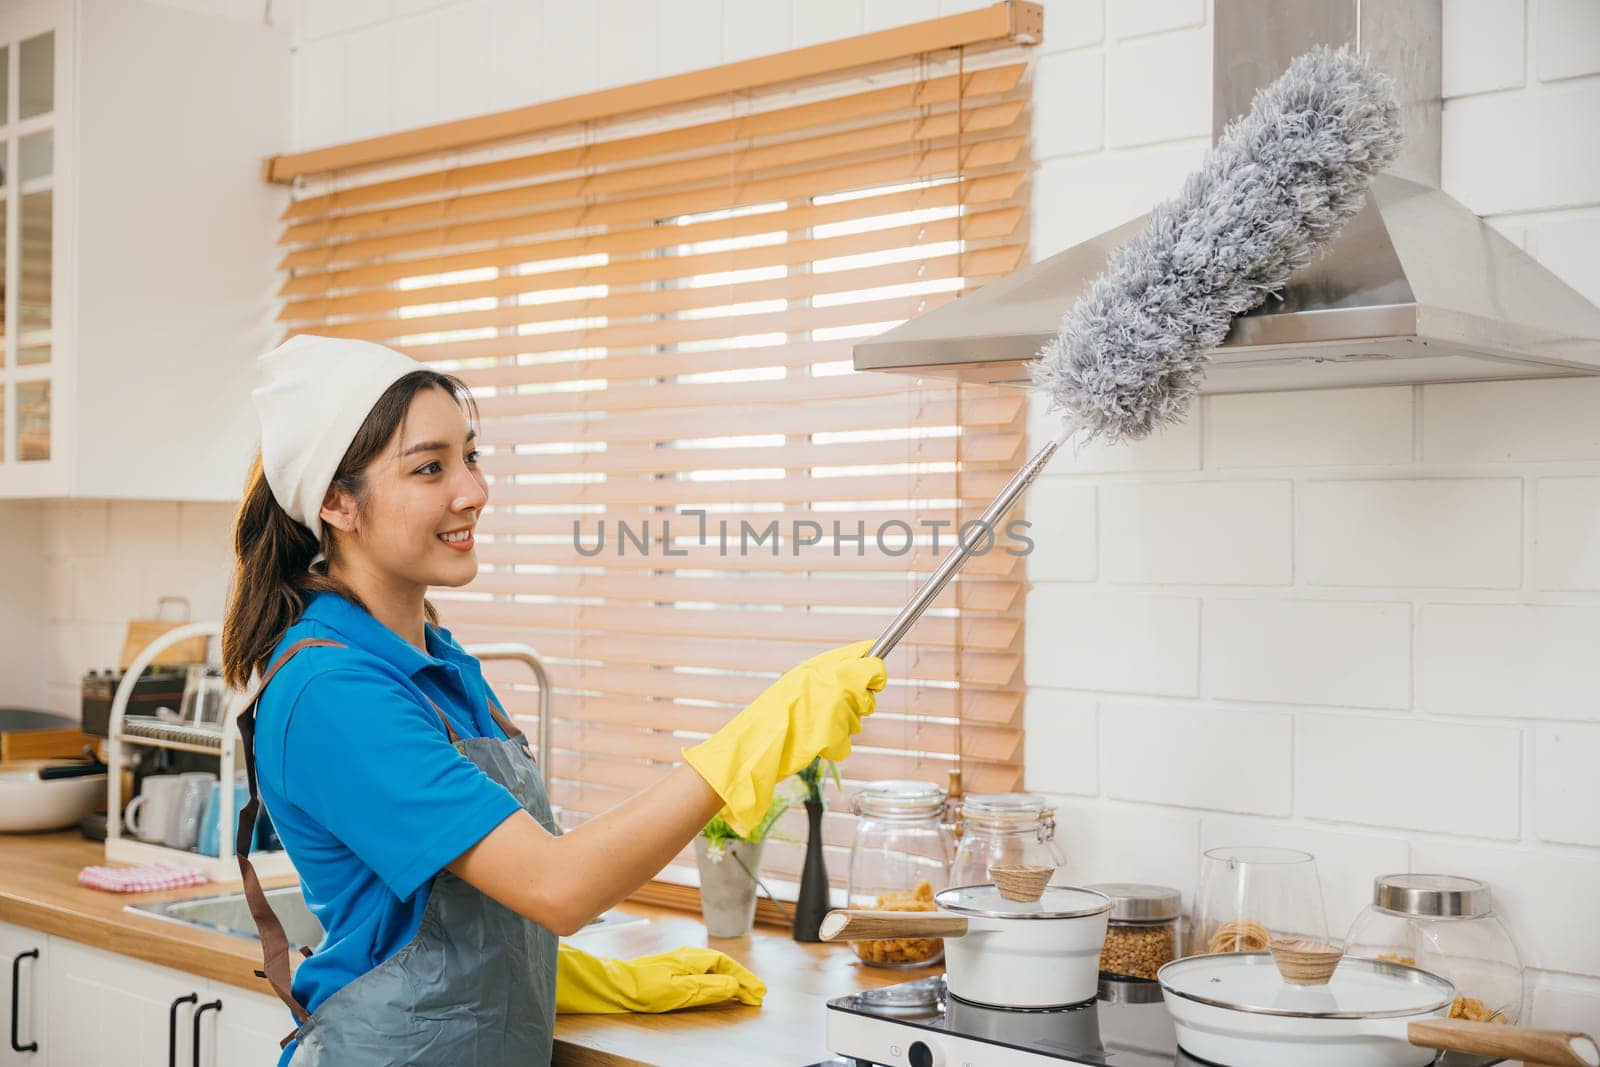 Maid in workwear and gloves cleans home dusts kitchen ventilation. Emphasizing modern housework hygiene equipment in use. Clean air brush maid service portrait. maid housekeeping concept.